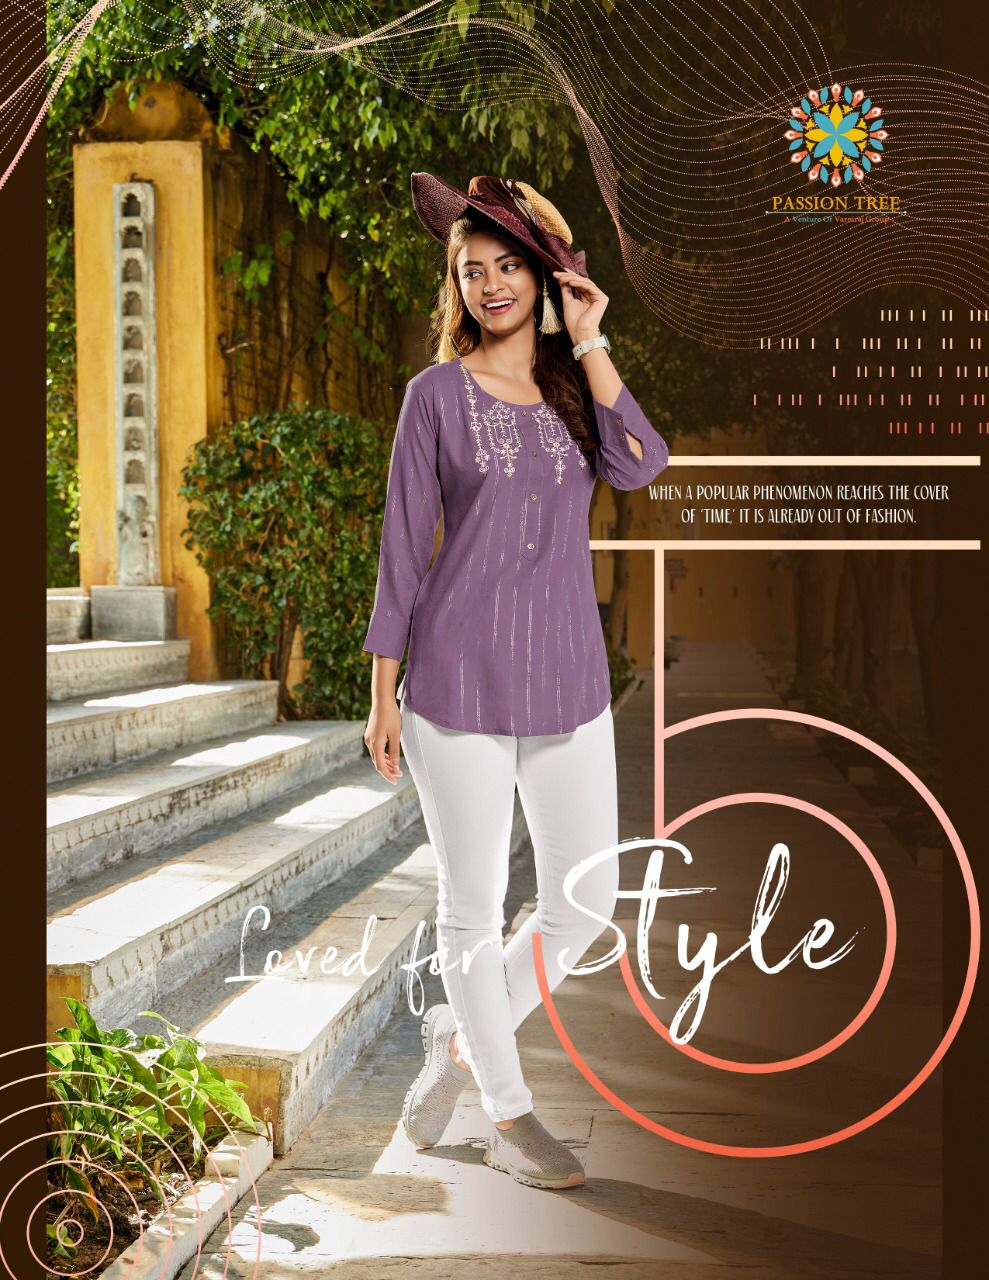 Passion Tree Flair Glow vol 1 Ladies Tops Catalog collection 2